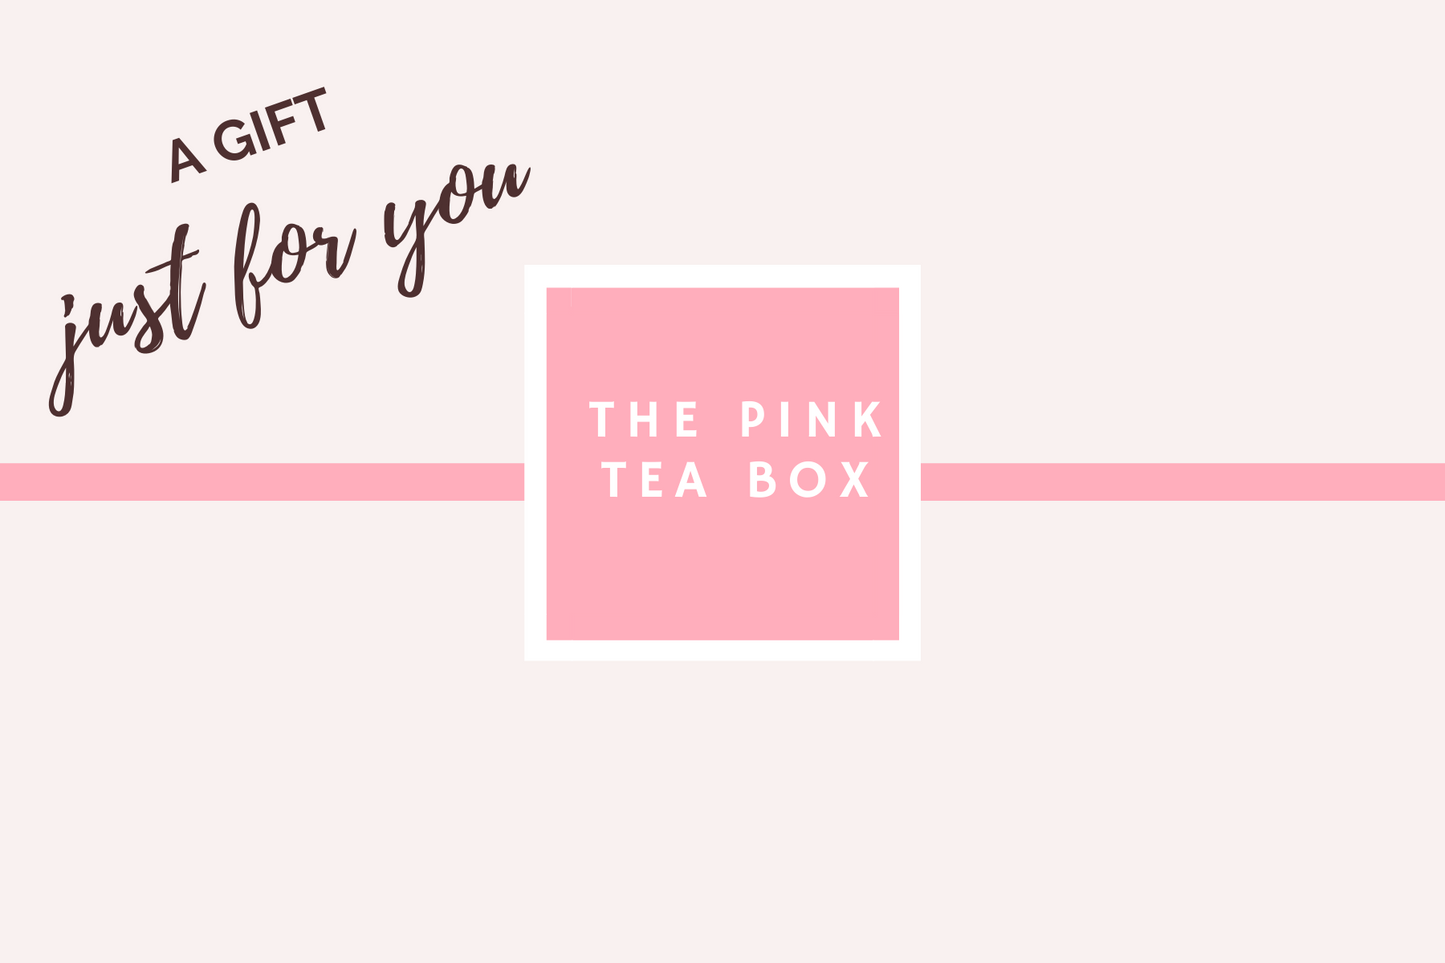 The Pink Tea Box GIft Voucher, pale pink background with Pink Tea Box Logo